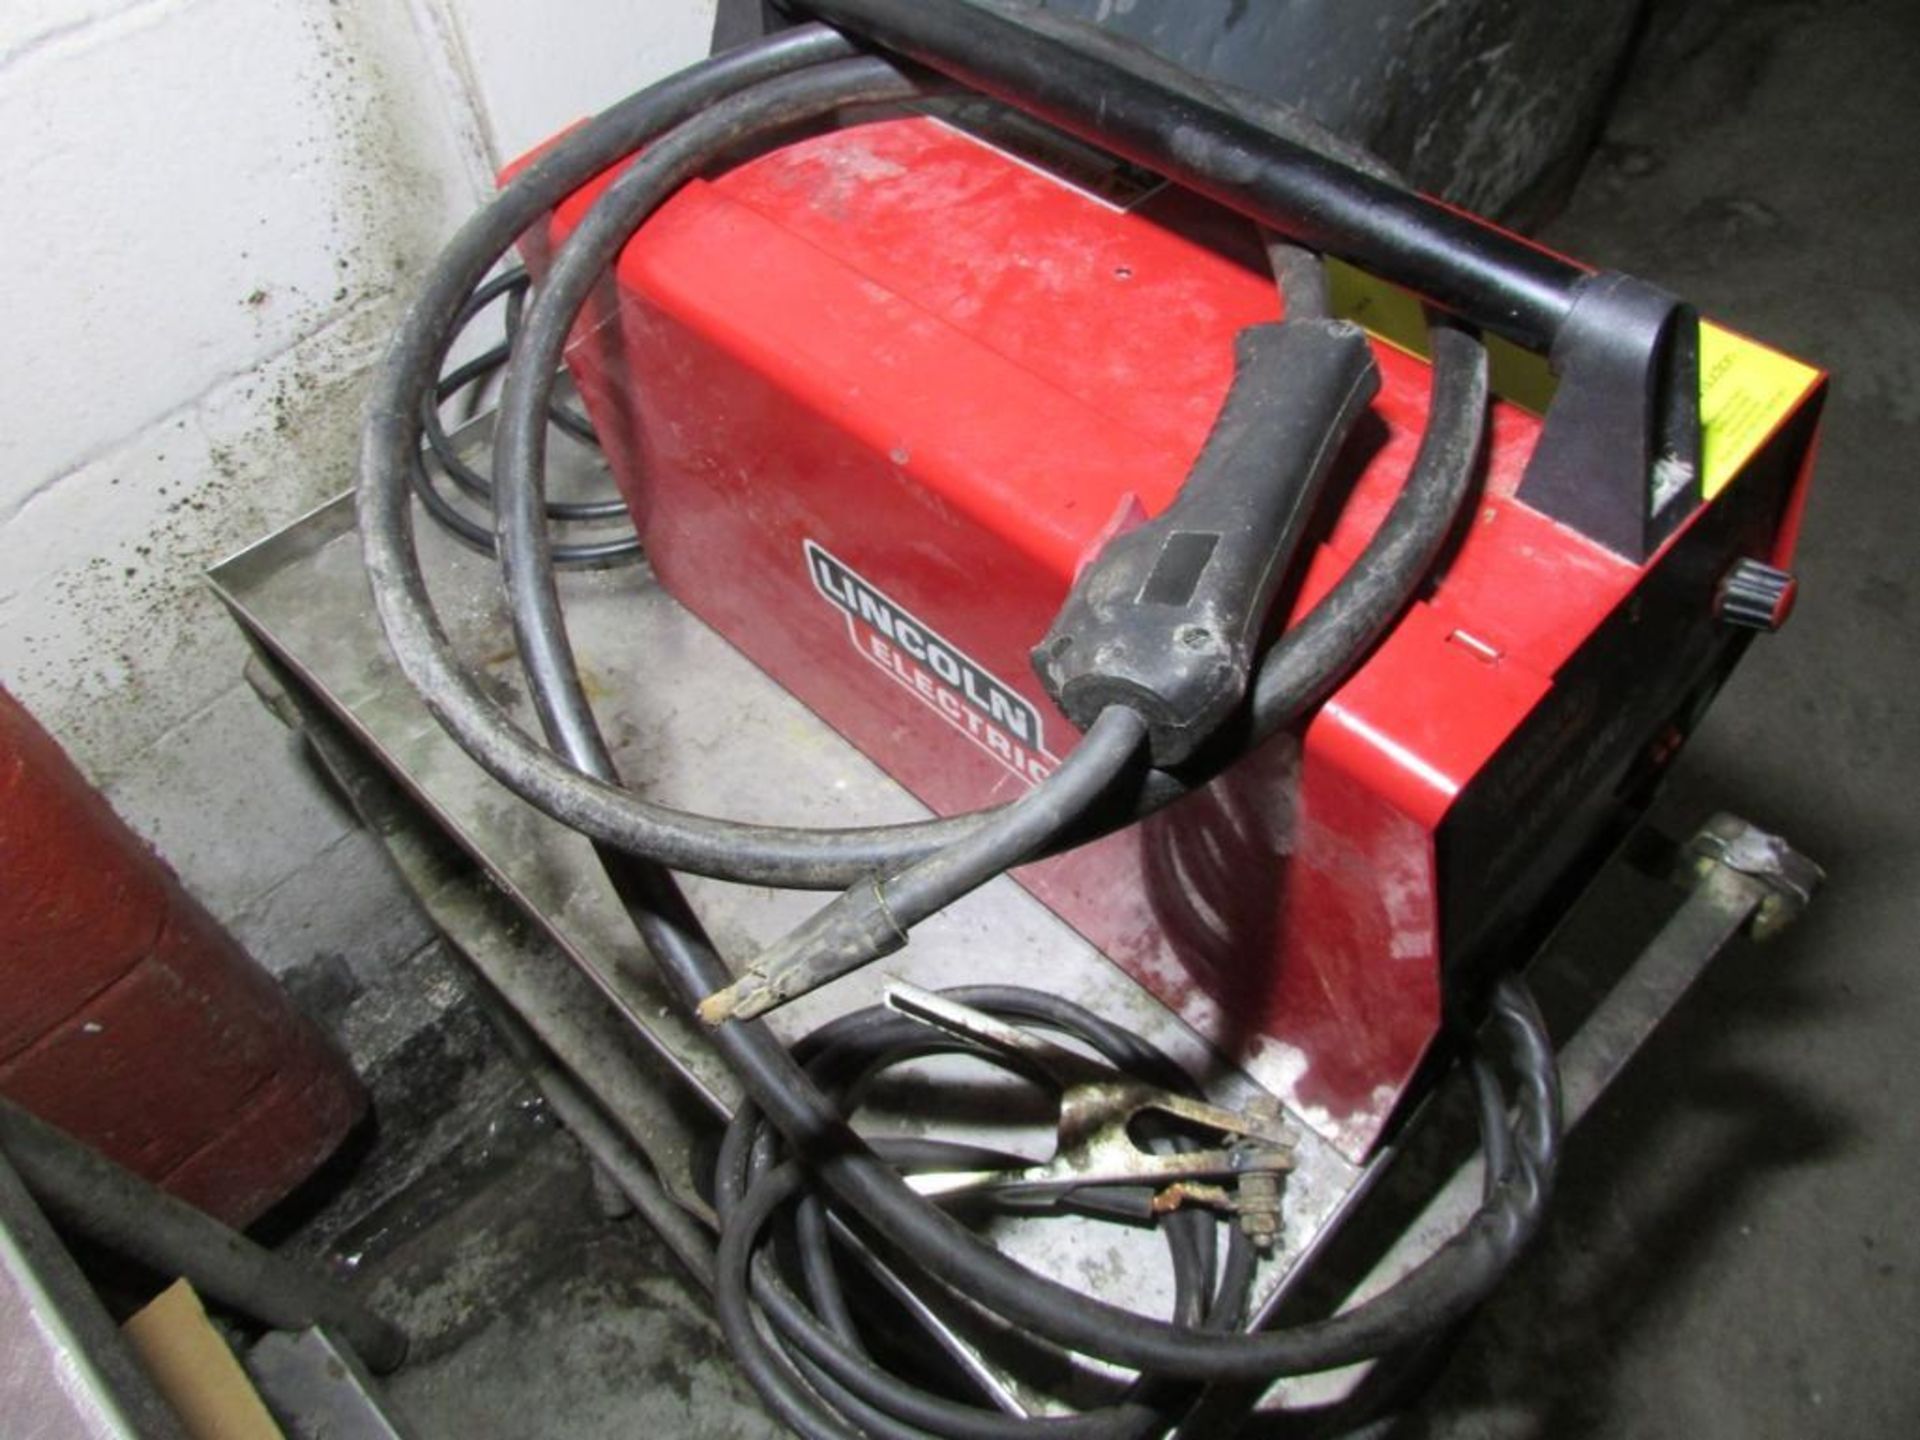 Lincoln Electric Handy MIG Wire Welder. 35-88A, 70A 17V 20% Duty Cycle Output, 115V 20A 60Hz 1PH Inp - Image 3 of 7